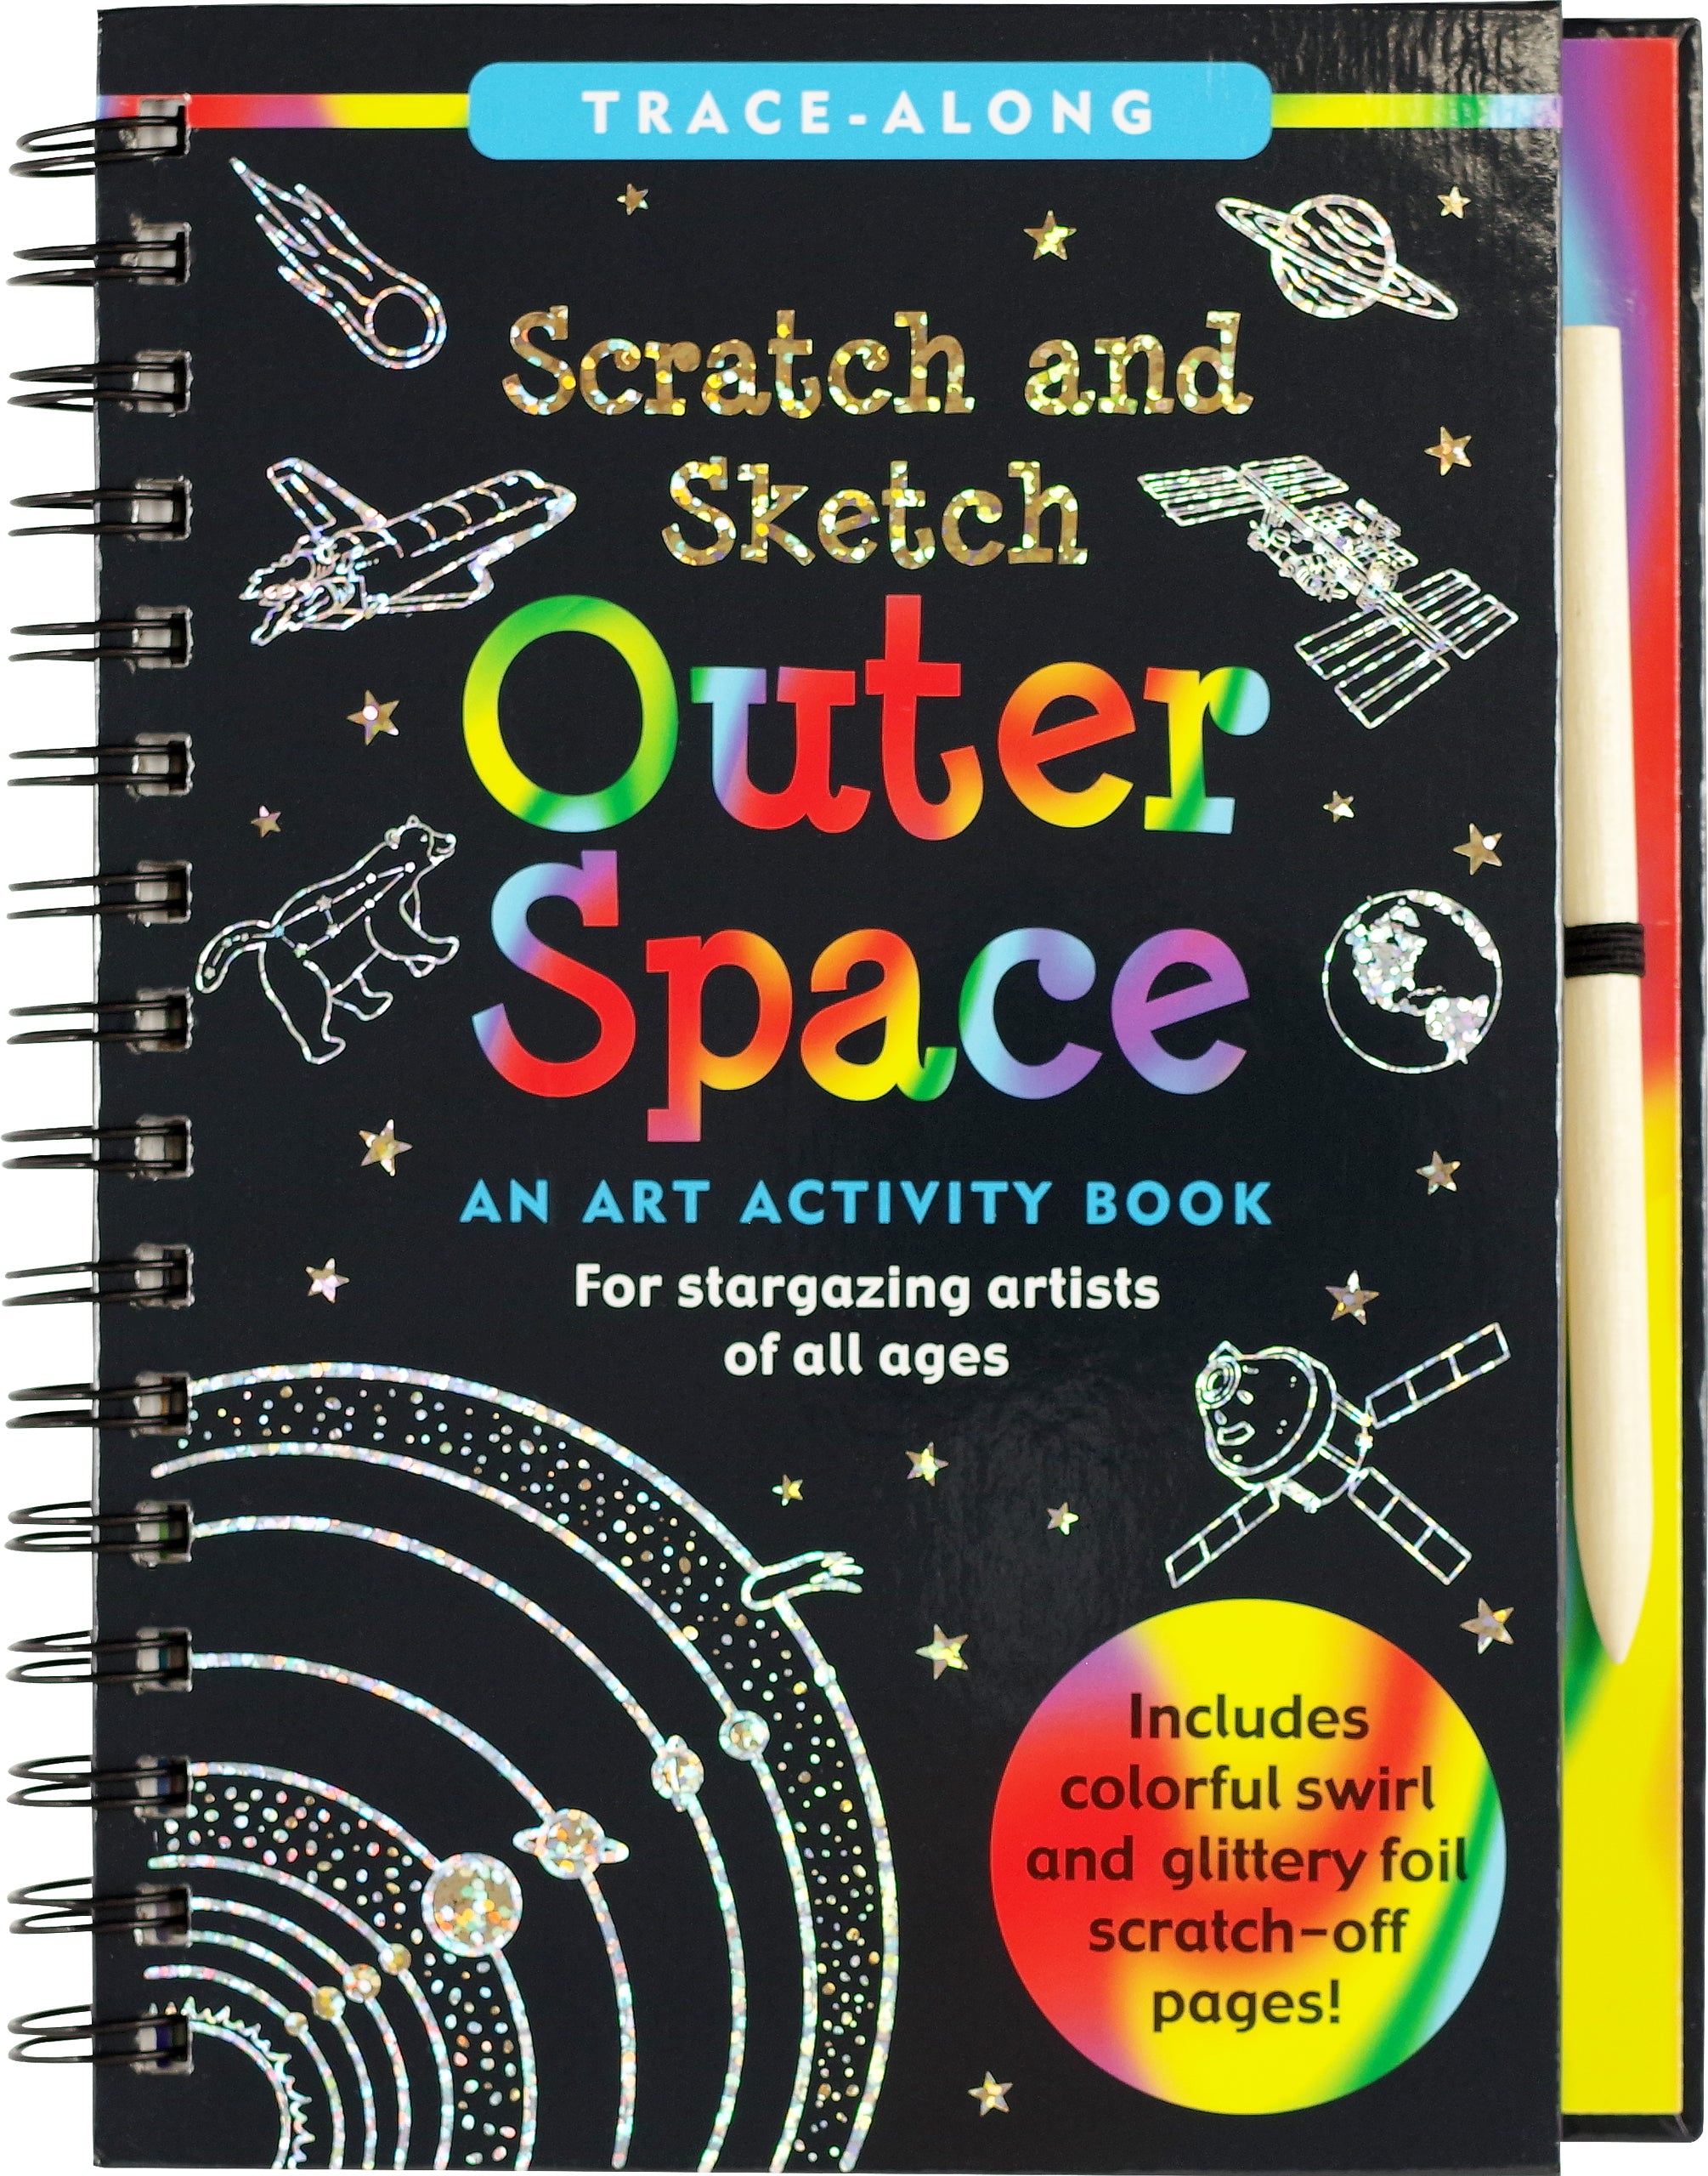 Scratch and Sketch Outer Space (Trace Along) [Book]